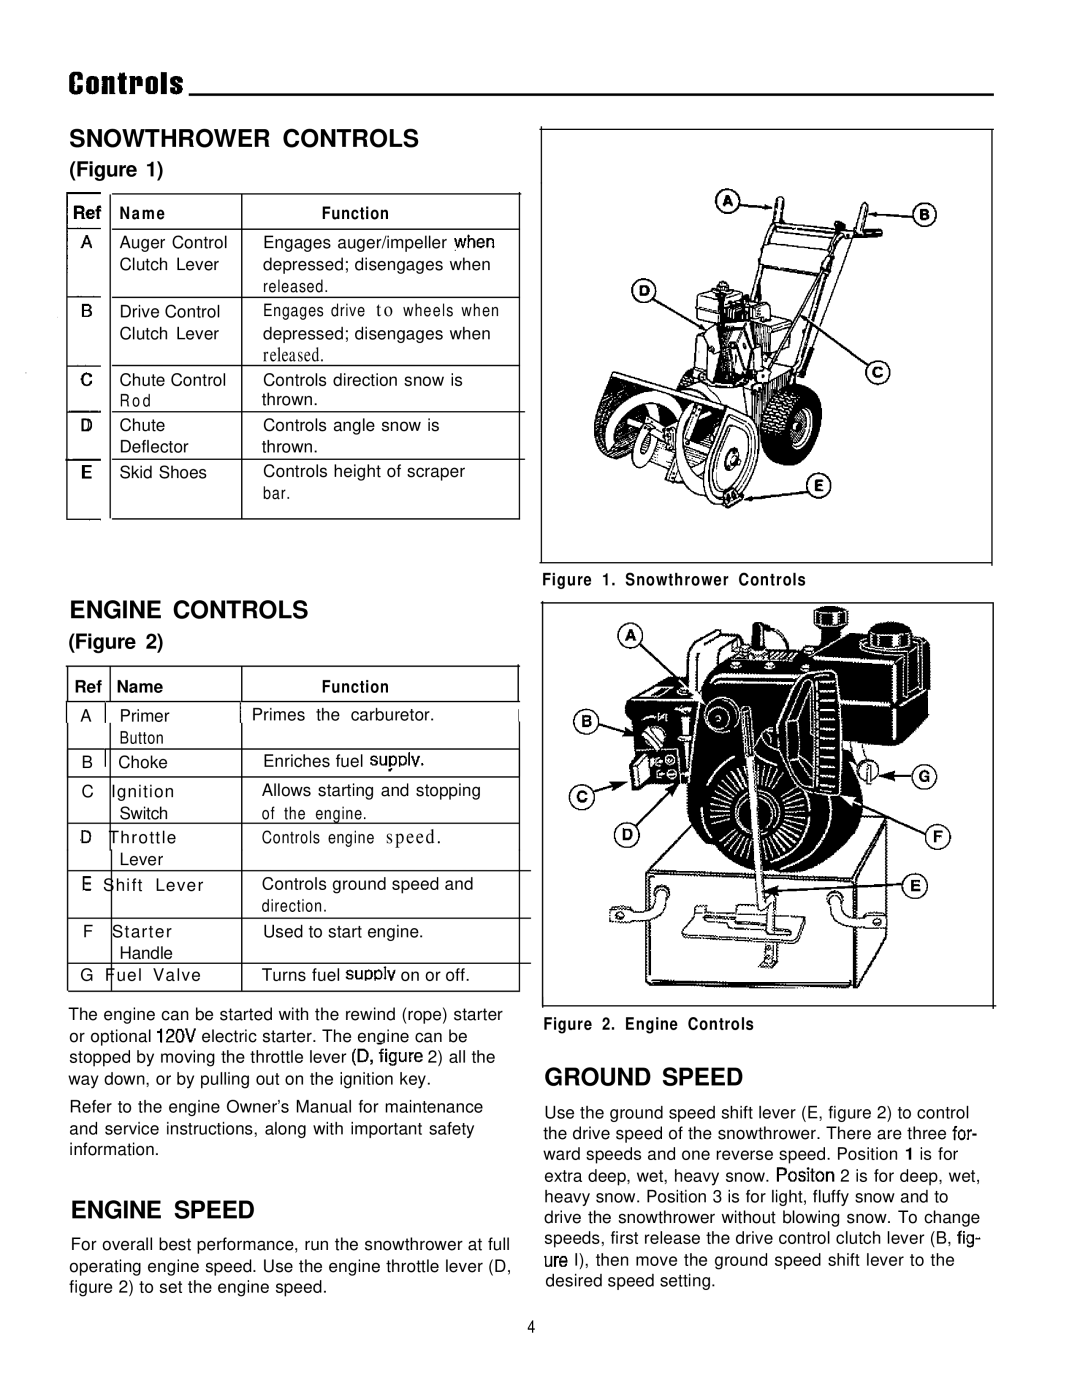 Simplicity 7/22E, 1691413, 1691414, 1691411 manual Snowthrower Controls, Engine Controls, Engine Speed, Ground Speed 